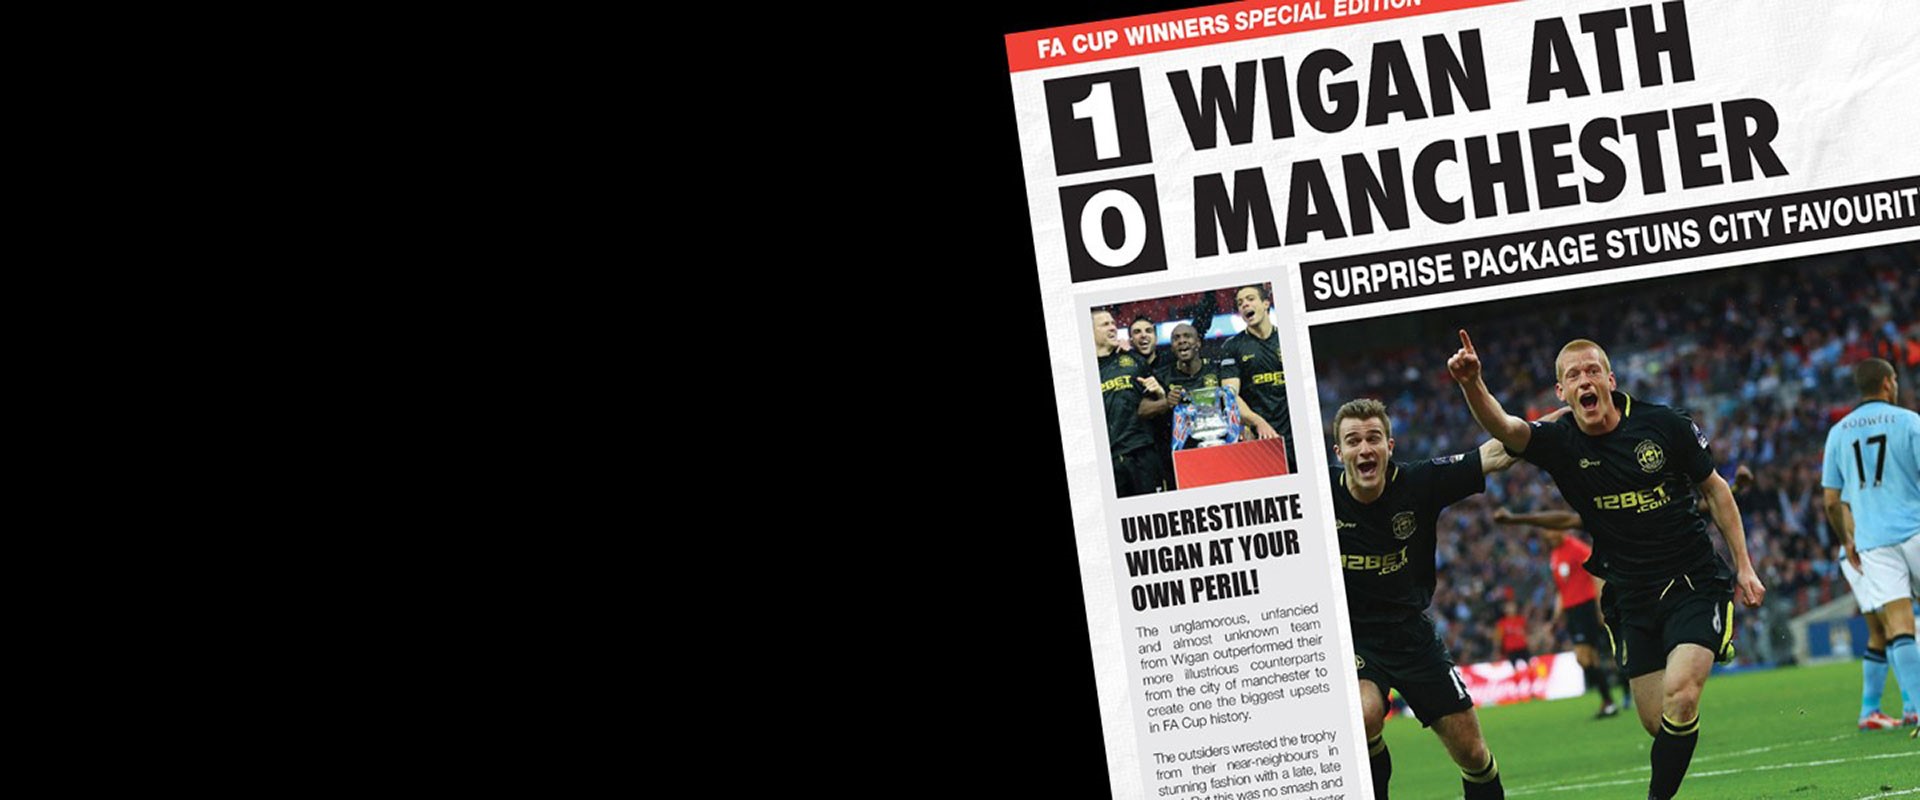 Work in Wigan? You must be joking. Actually, it’s full of surprises.